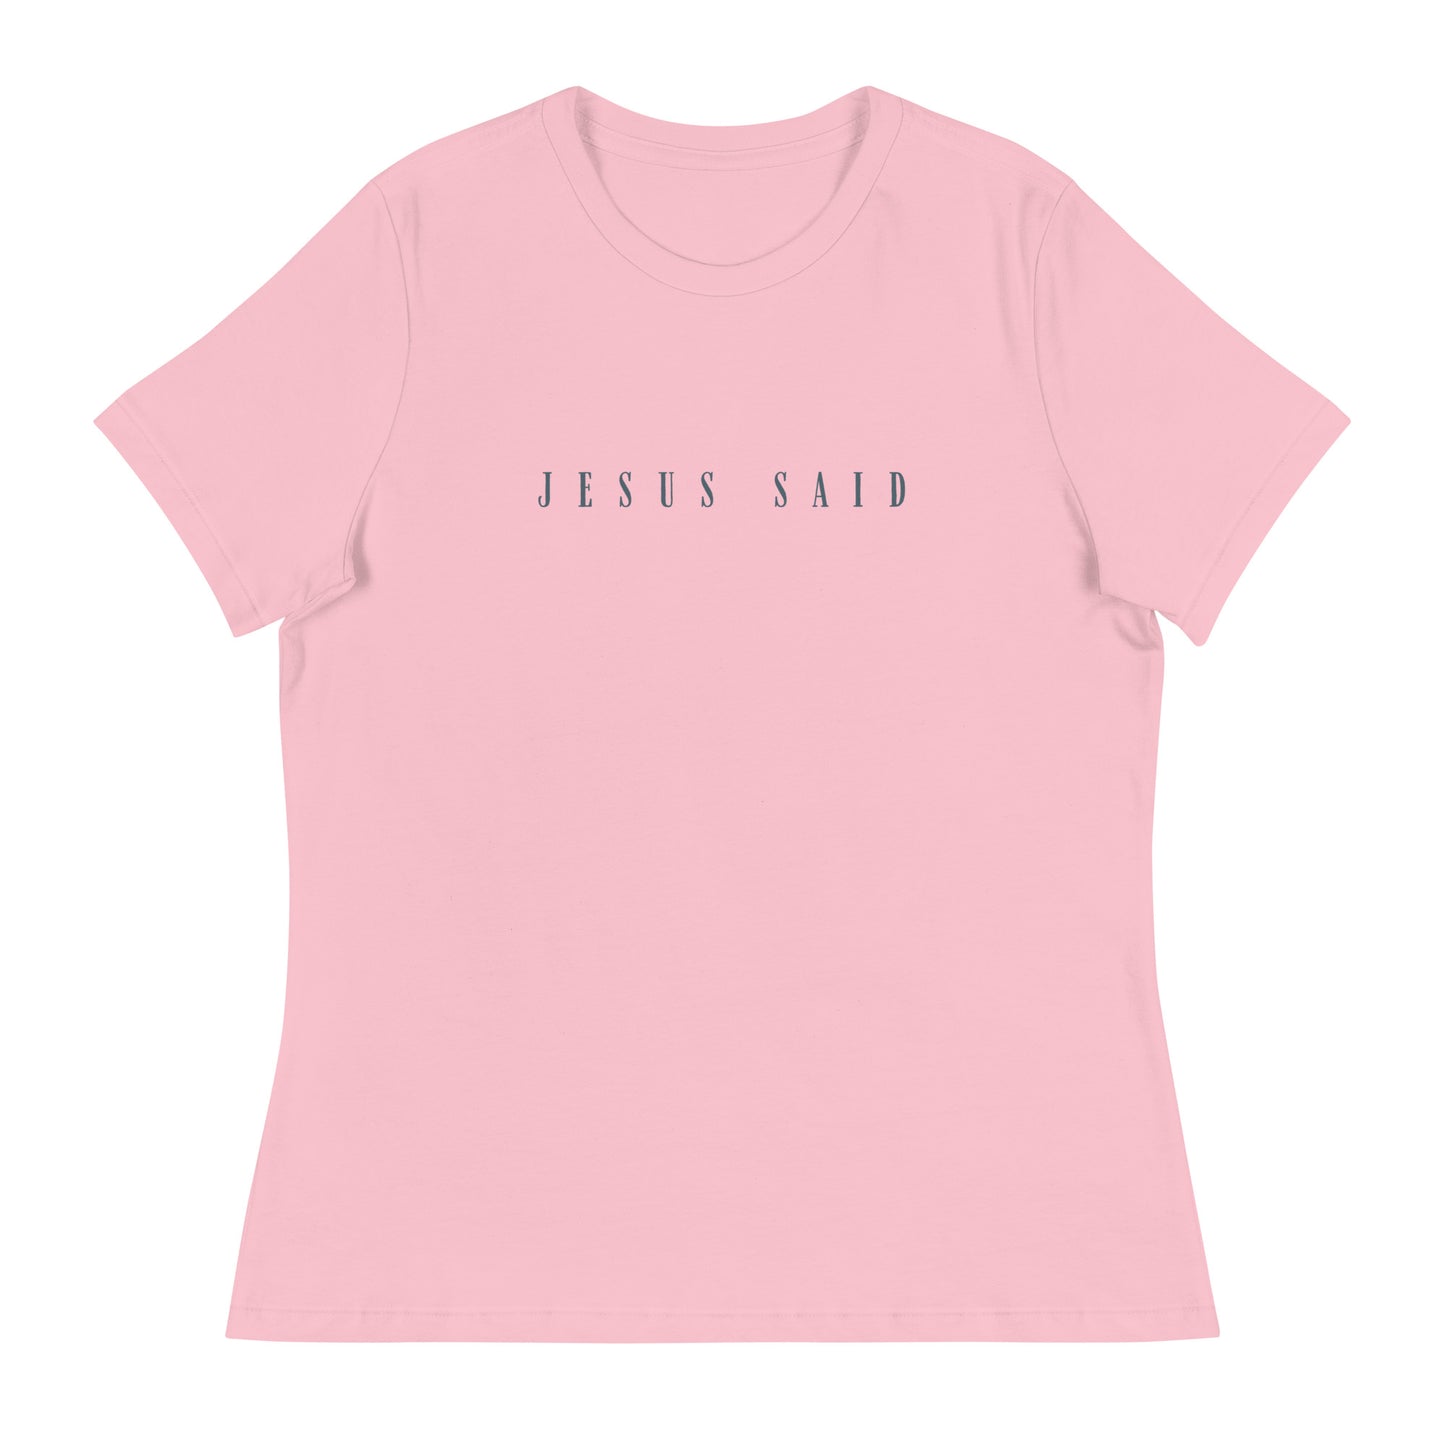 "Jesus Said" Women's Relaxed T-Shirt